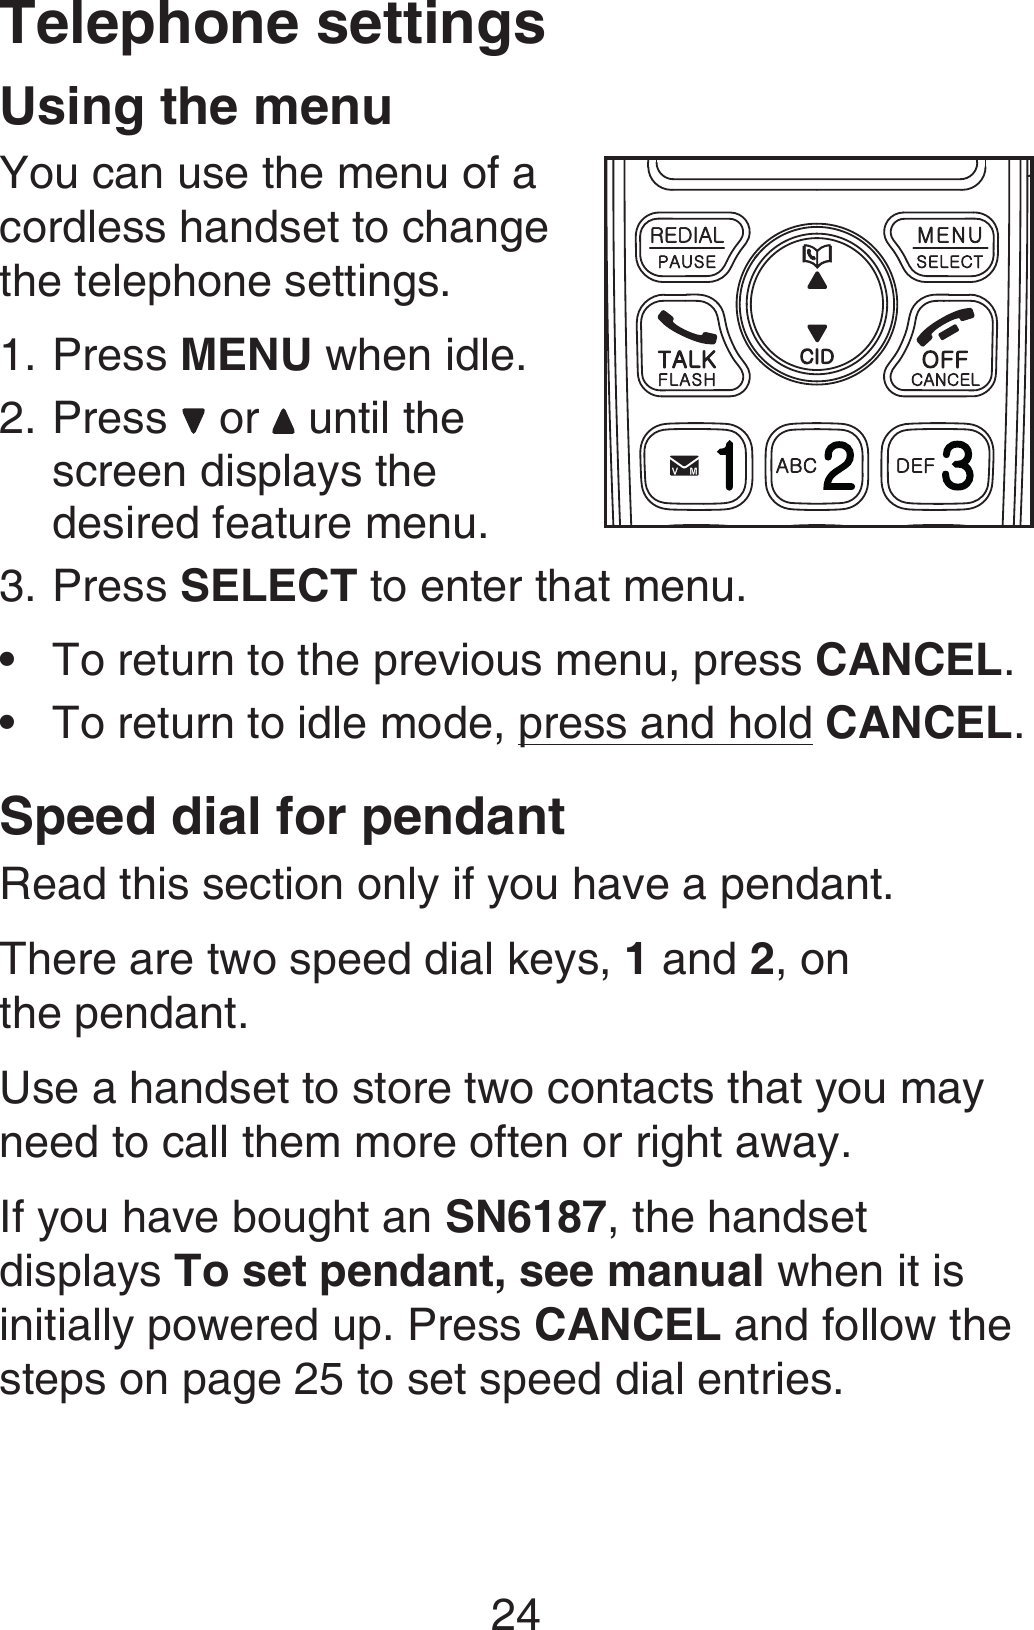 24Using the menuYou can use the menu of a cordless handset to change the telephone settings.Press MENU when idle.Press   or   until the screen displays the desired feature menu. Press SELECT to enter that menu.To return to the previous menu, press CANCEL.To return to idle mode, press and hold CANCEL.Speed dial for pendantRead this section only if you have a pendant.There are two speed dial keys, 1 and 2, on  the pendant.Use a handset to store two contacts that you may need to call them more often or right away.If you have bought an SN6187, the handset displays To set pendant, see manual when it is initially powered up. Press CANCEL and follow the steps on page 25 to set speed dial entries. 1.2.3.••Telephone settings